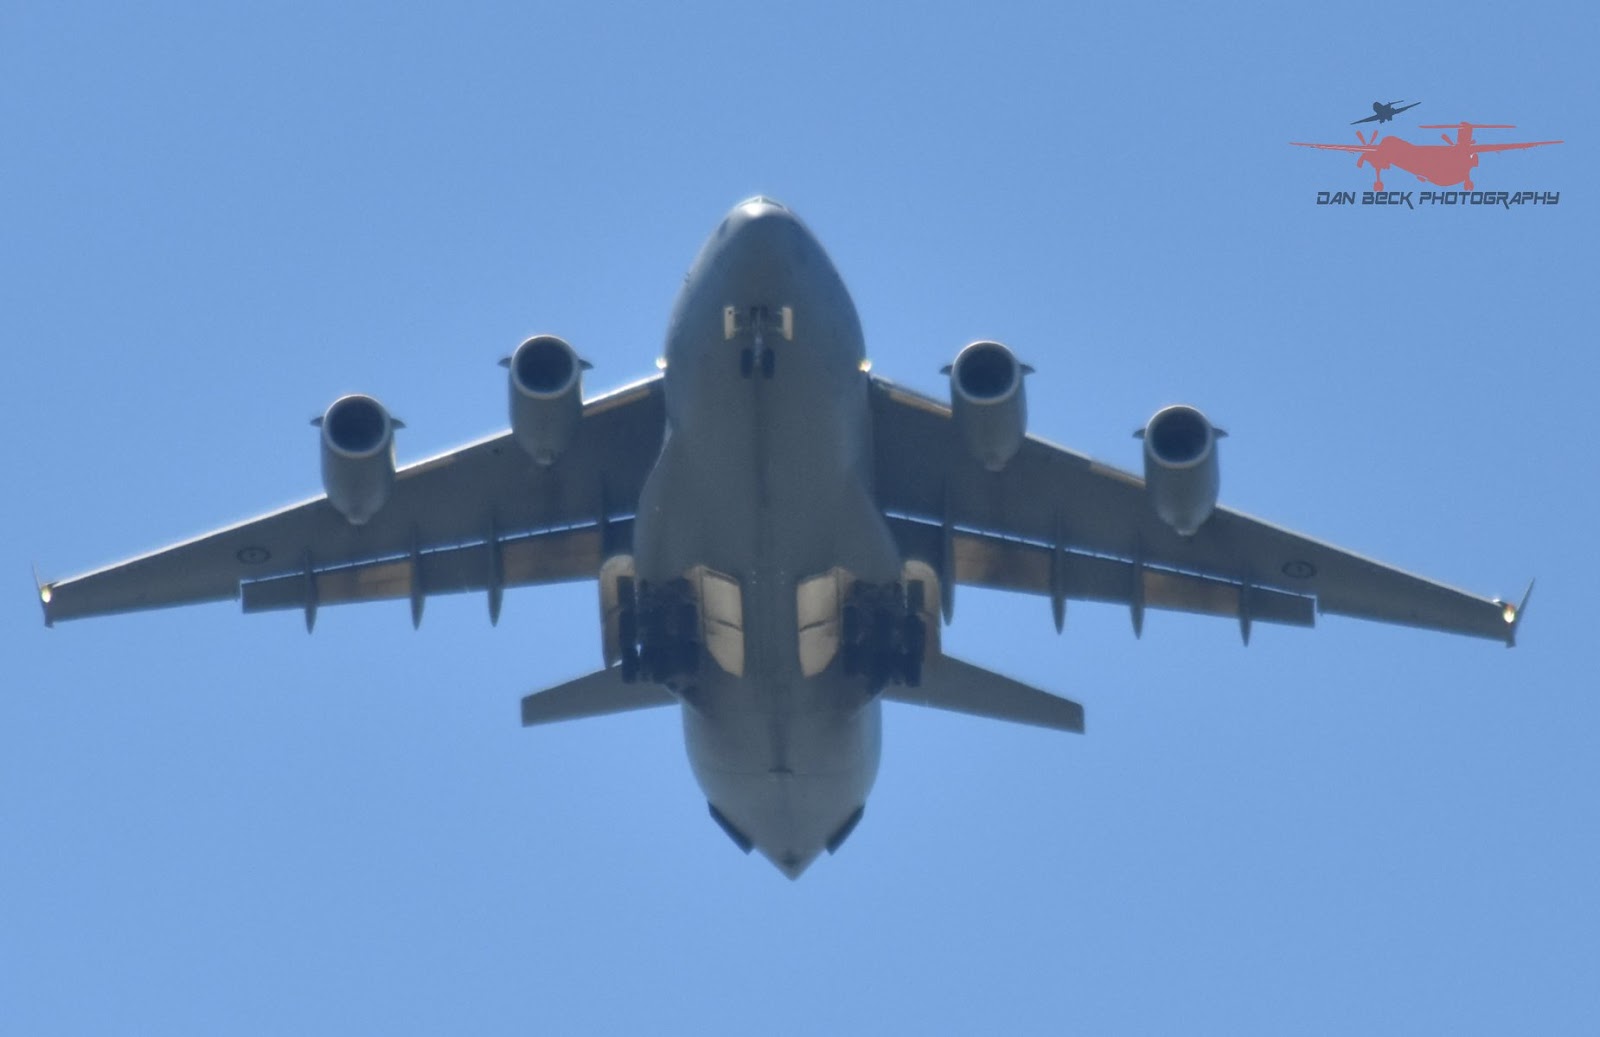 Central Queensland Plane Spotting: Boeing C-17A III A41-213 "Stallion 60” Missed Approach at Bundaberg Airport Plus More!